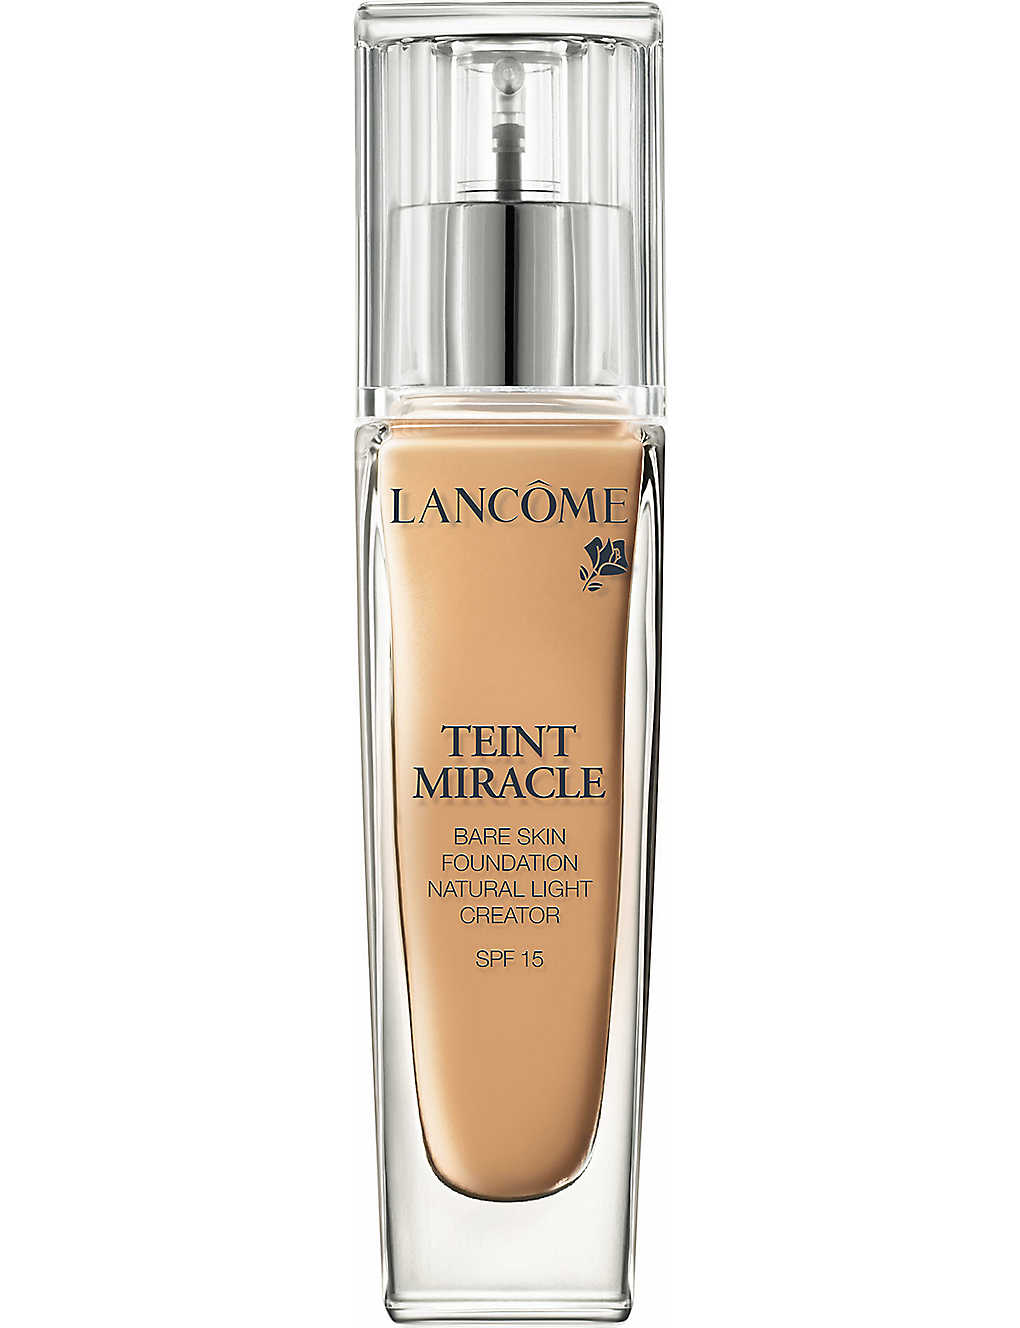 Lancôme Lancome 5 Teint Miracle Bare Skin Perfection Foundation Spf 15